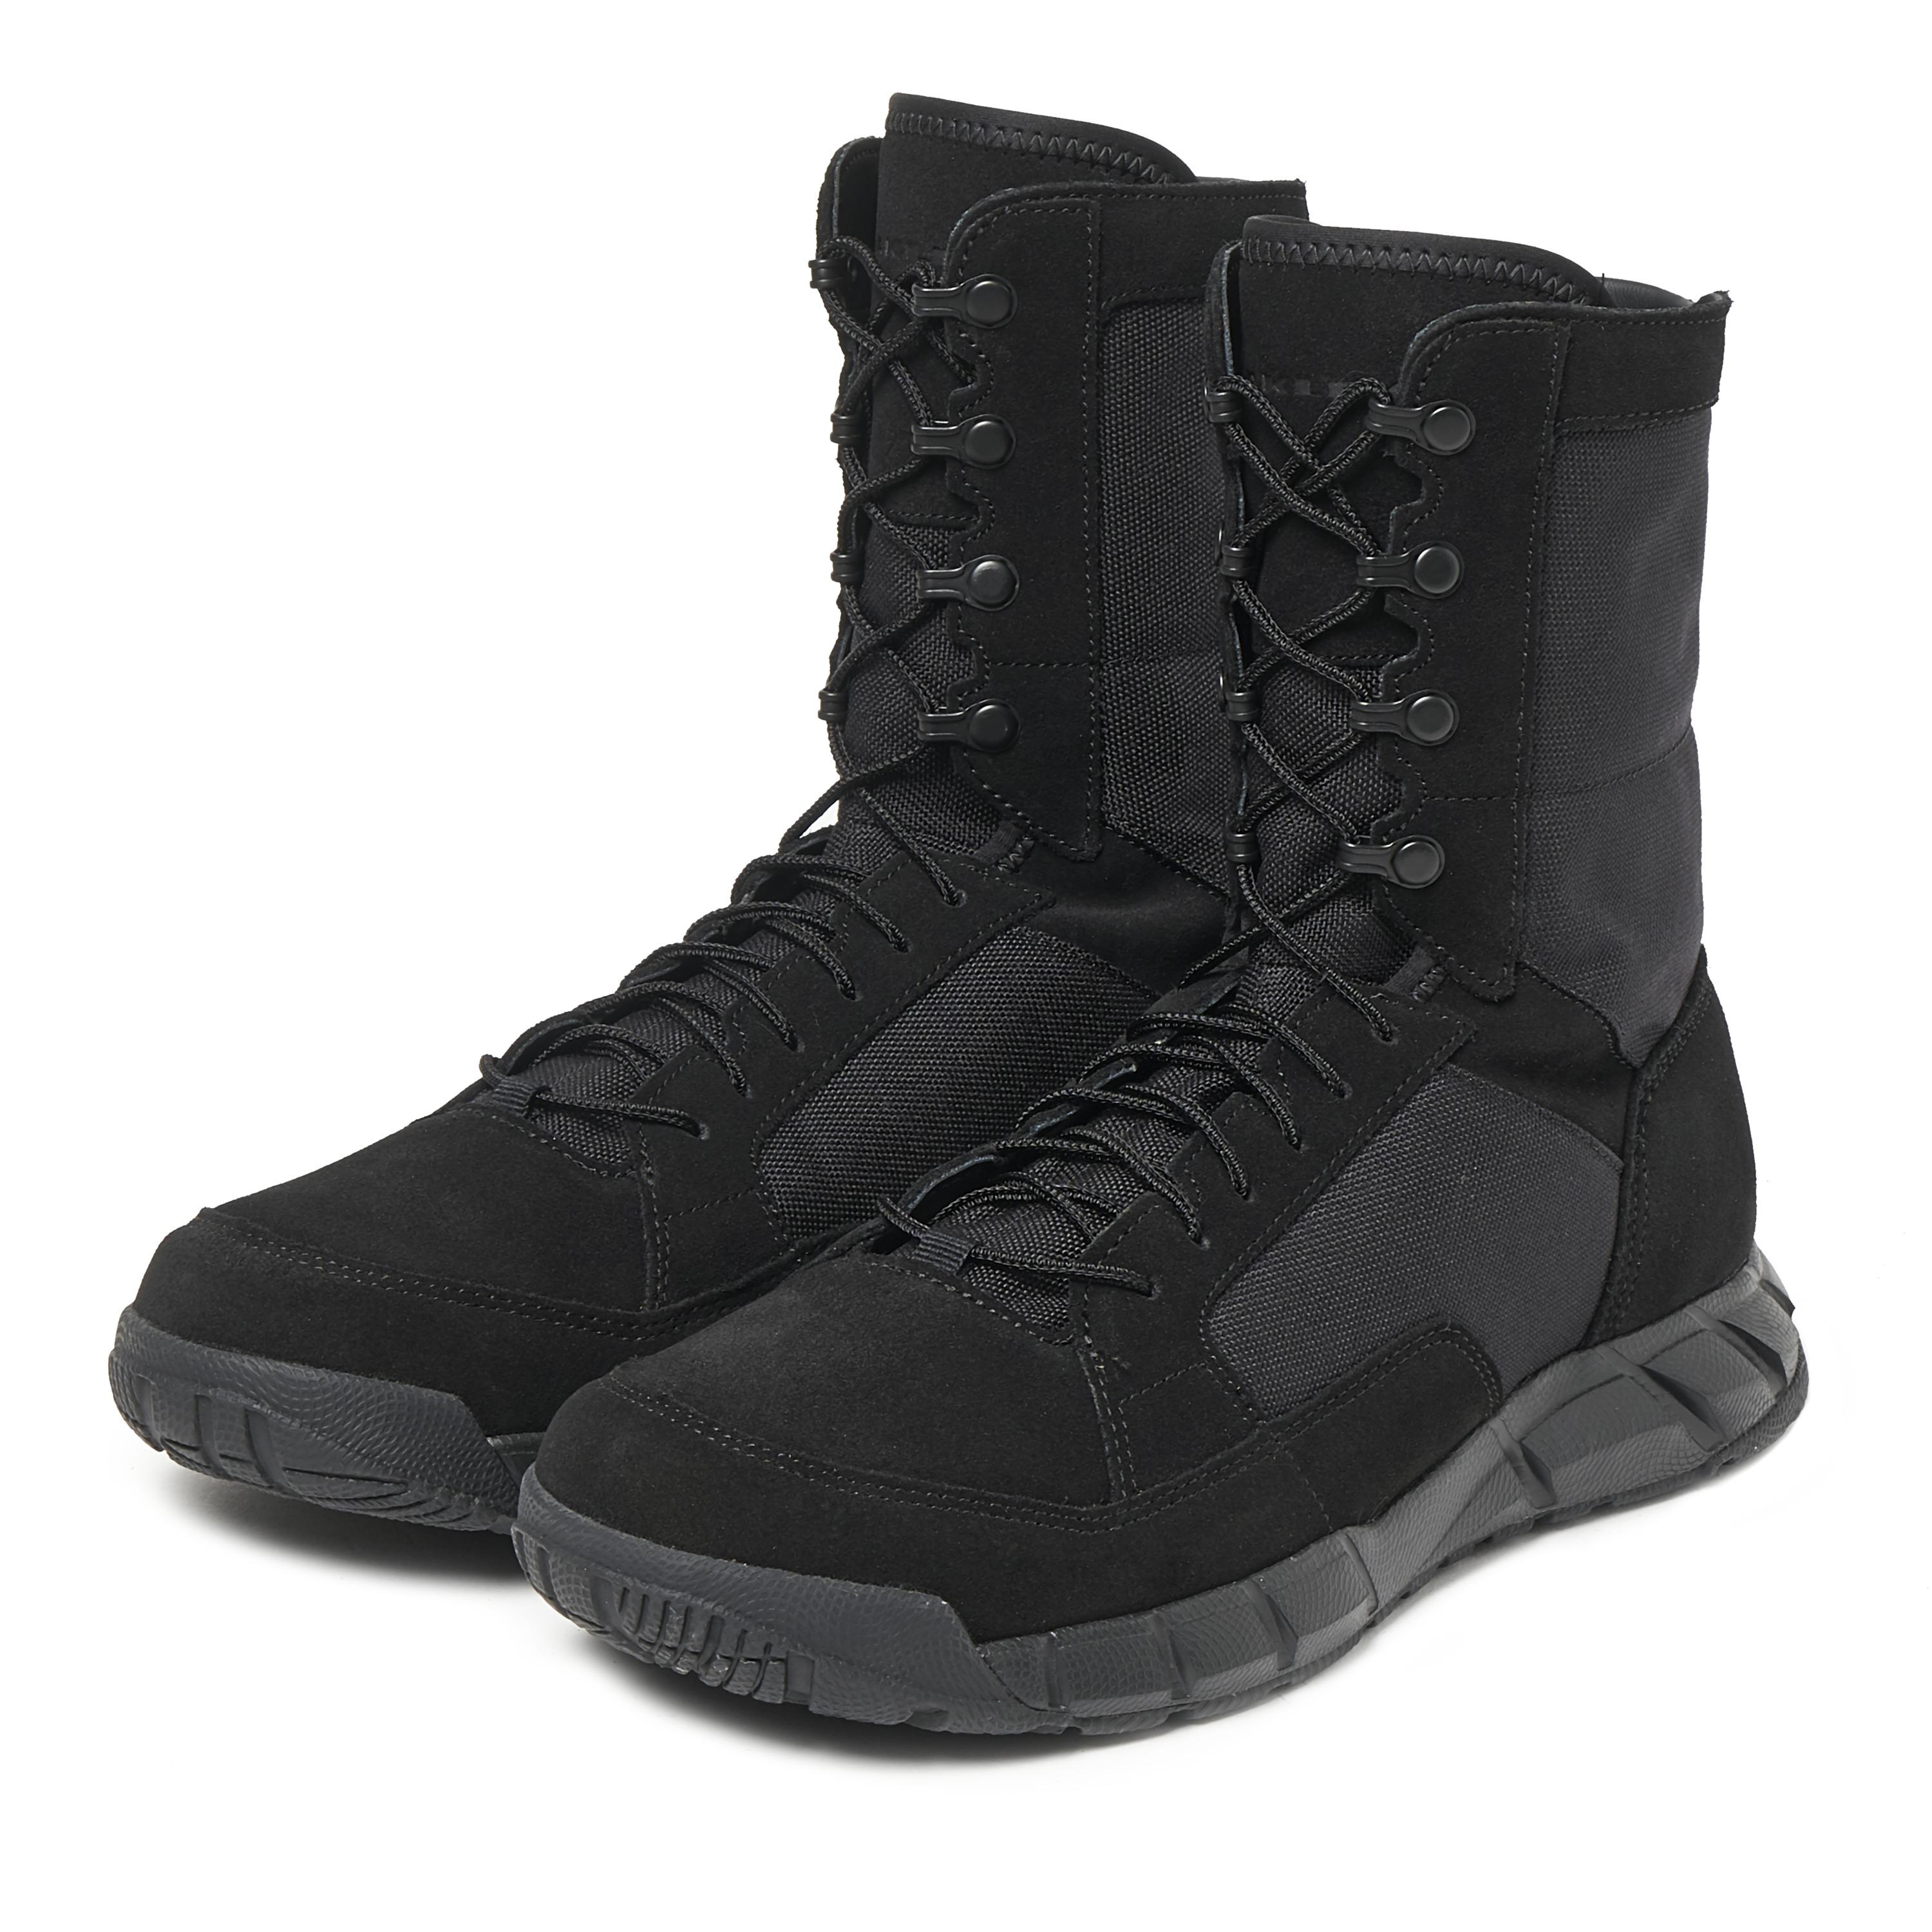 Oakley Synthetic S Light Assault Boot 2 Boots in Black for Men - Lyst